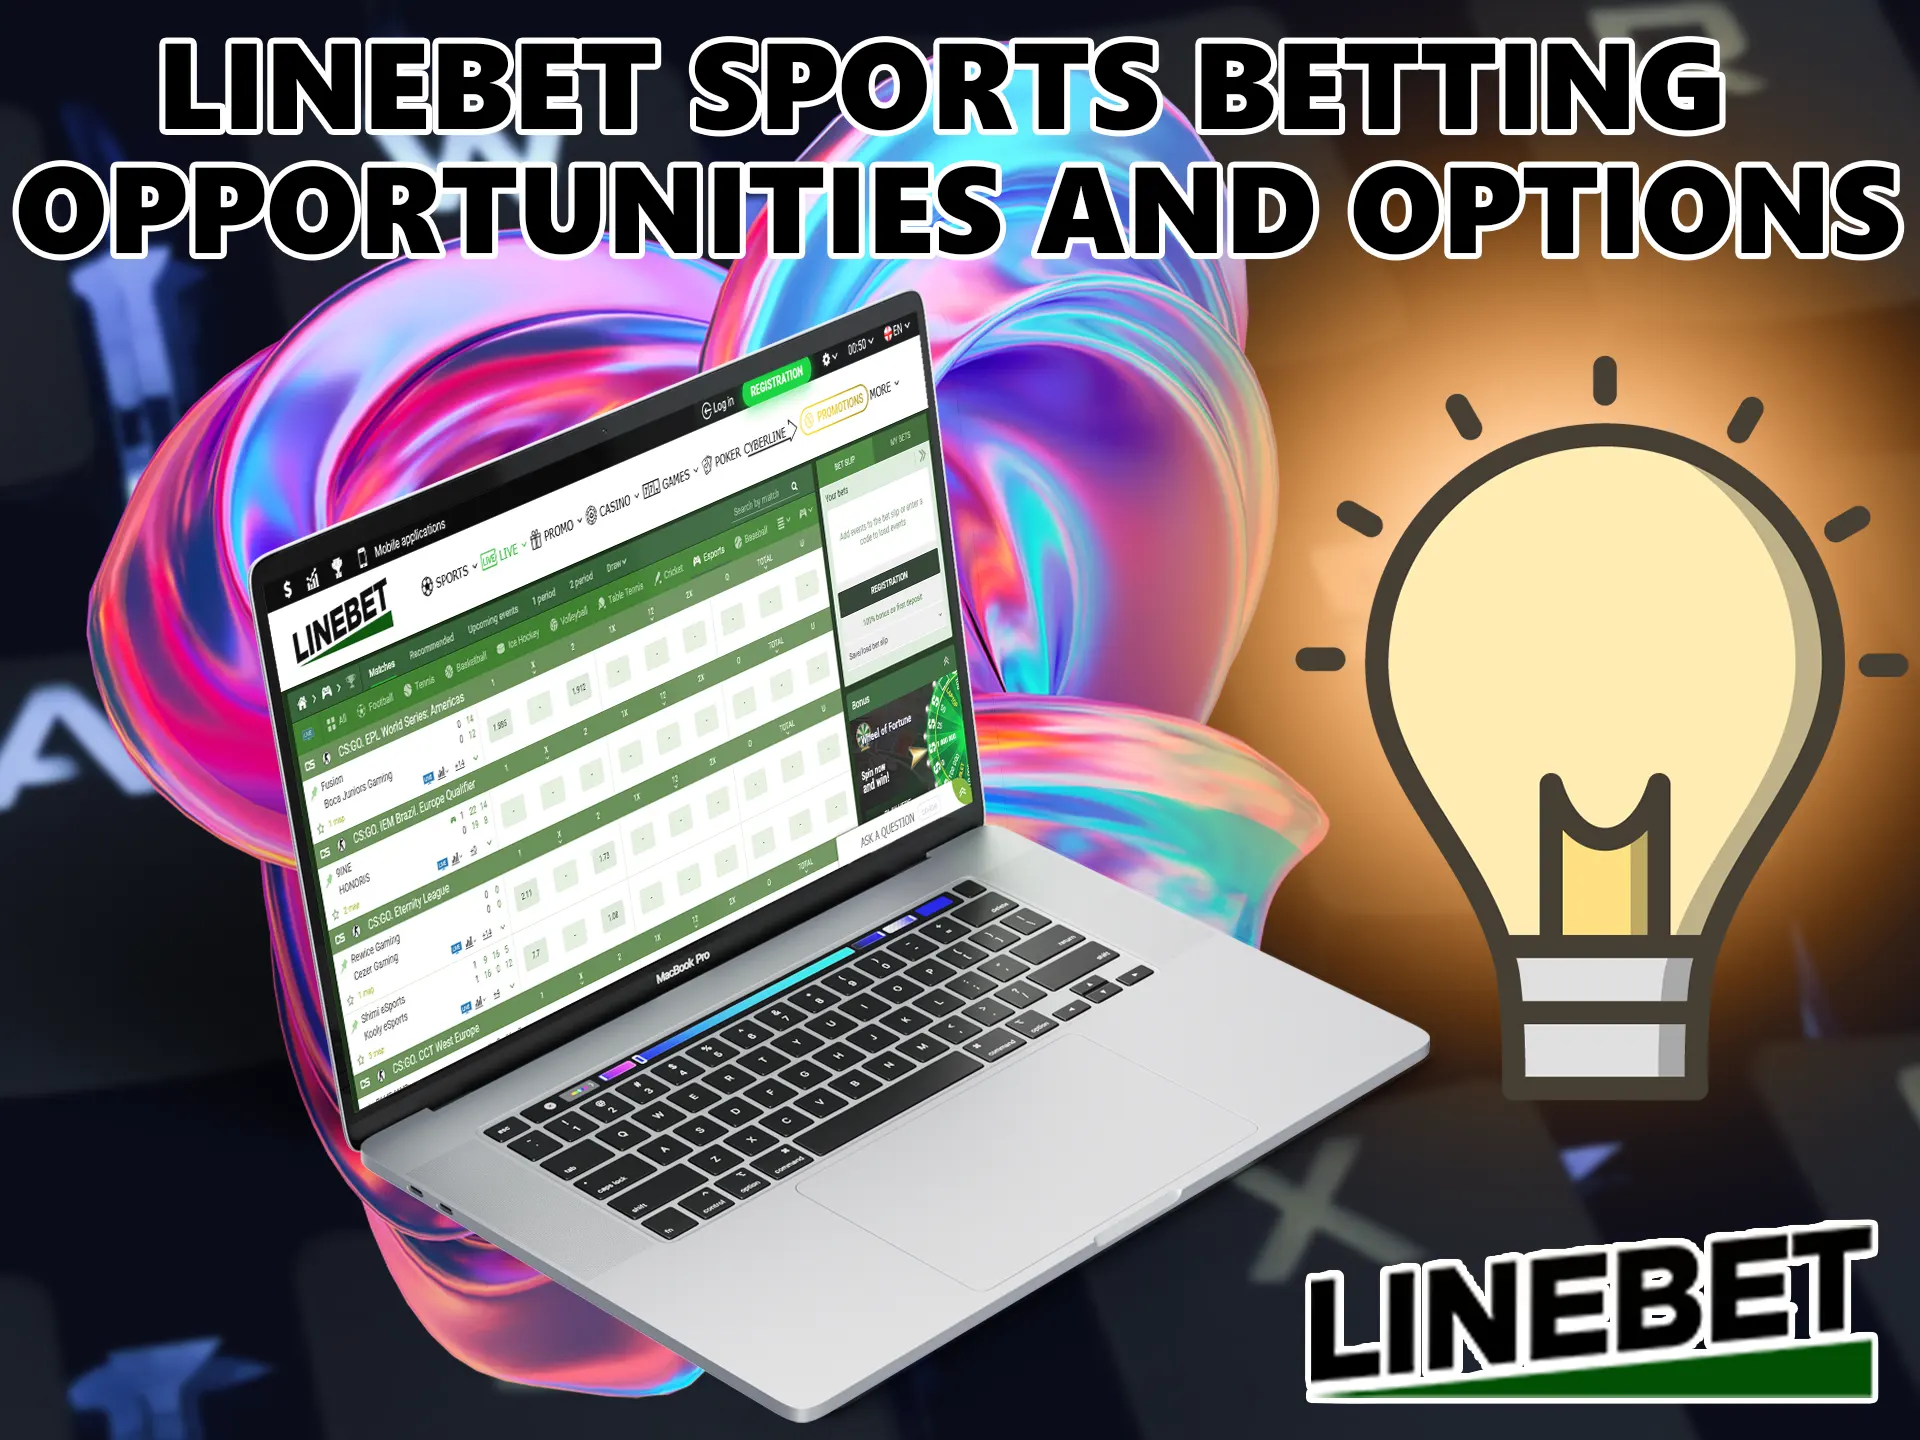 Indian players will enjoy a wide range of categories that can be found on Linebet's website.